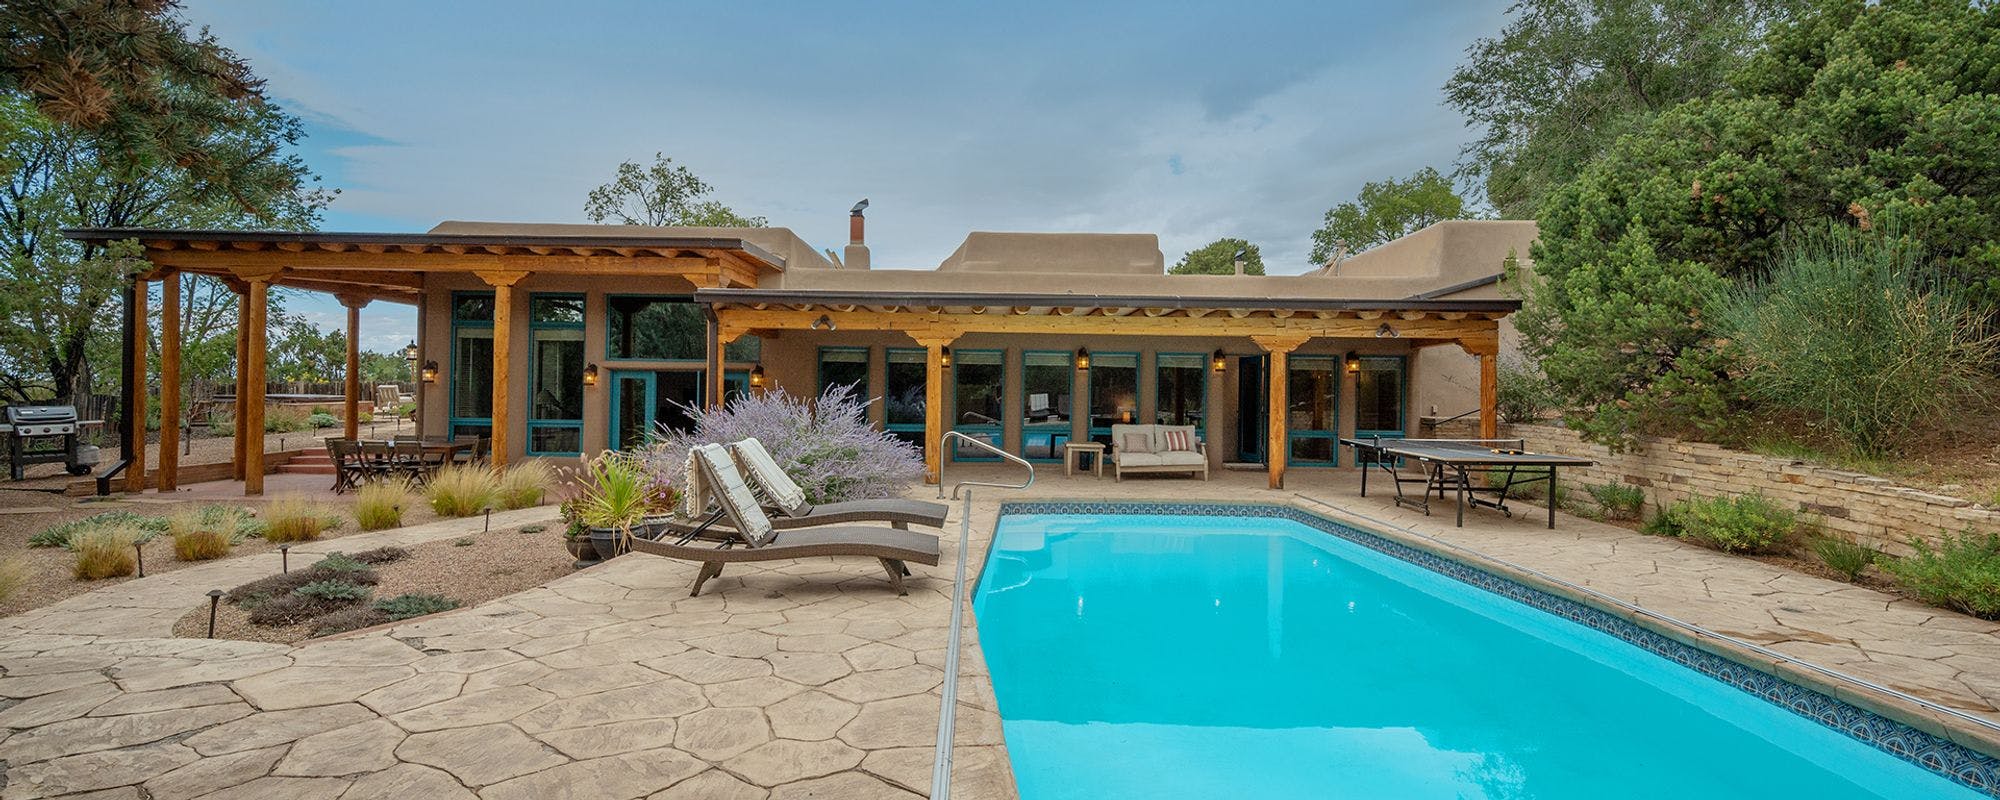 Luxurious outdoor living space with a pool at a Santa Fe vacation rental